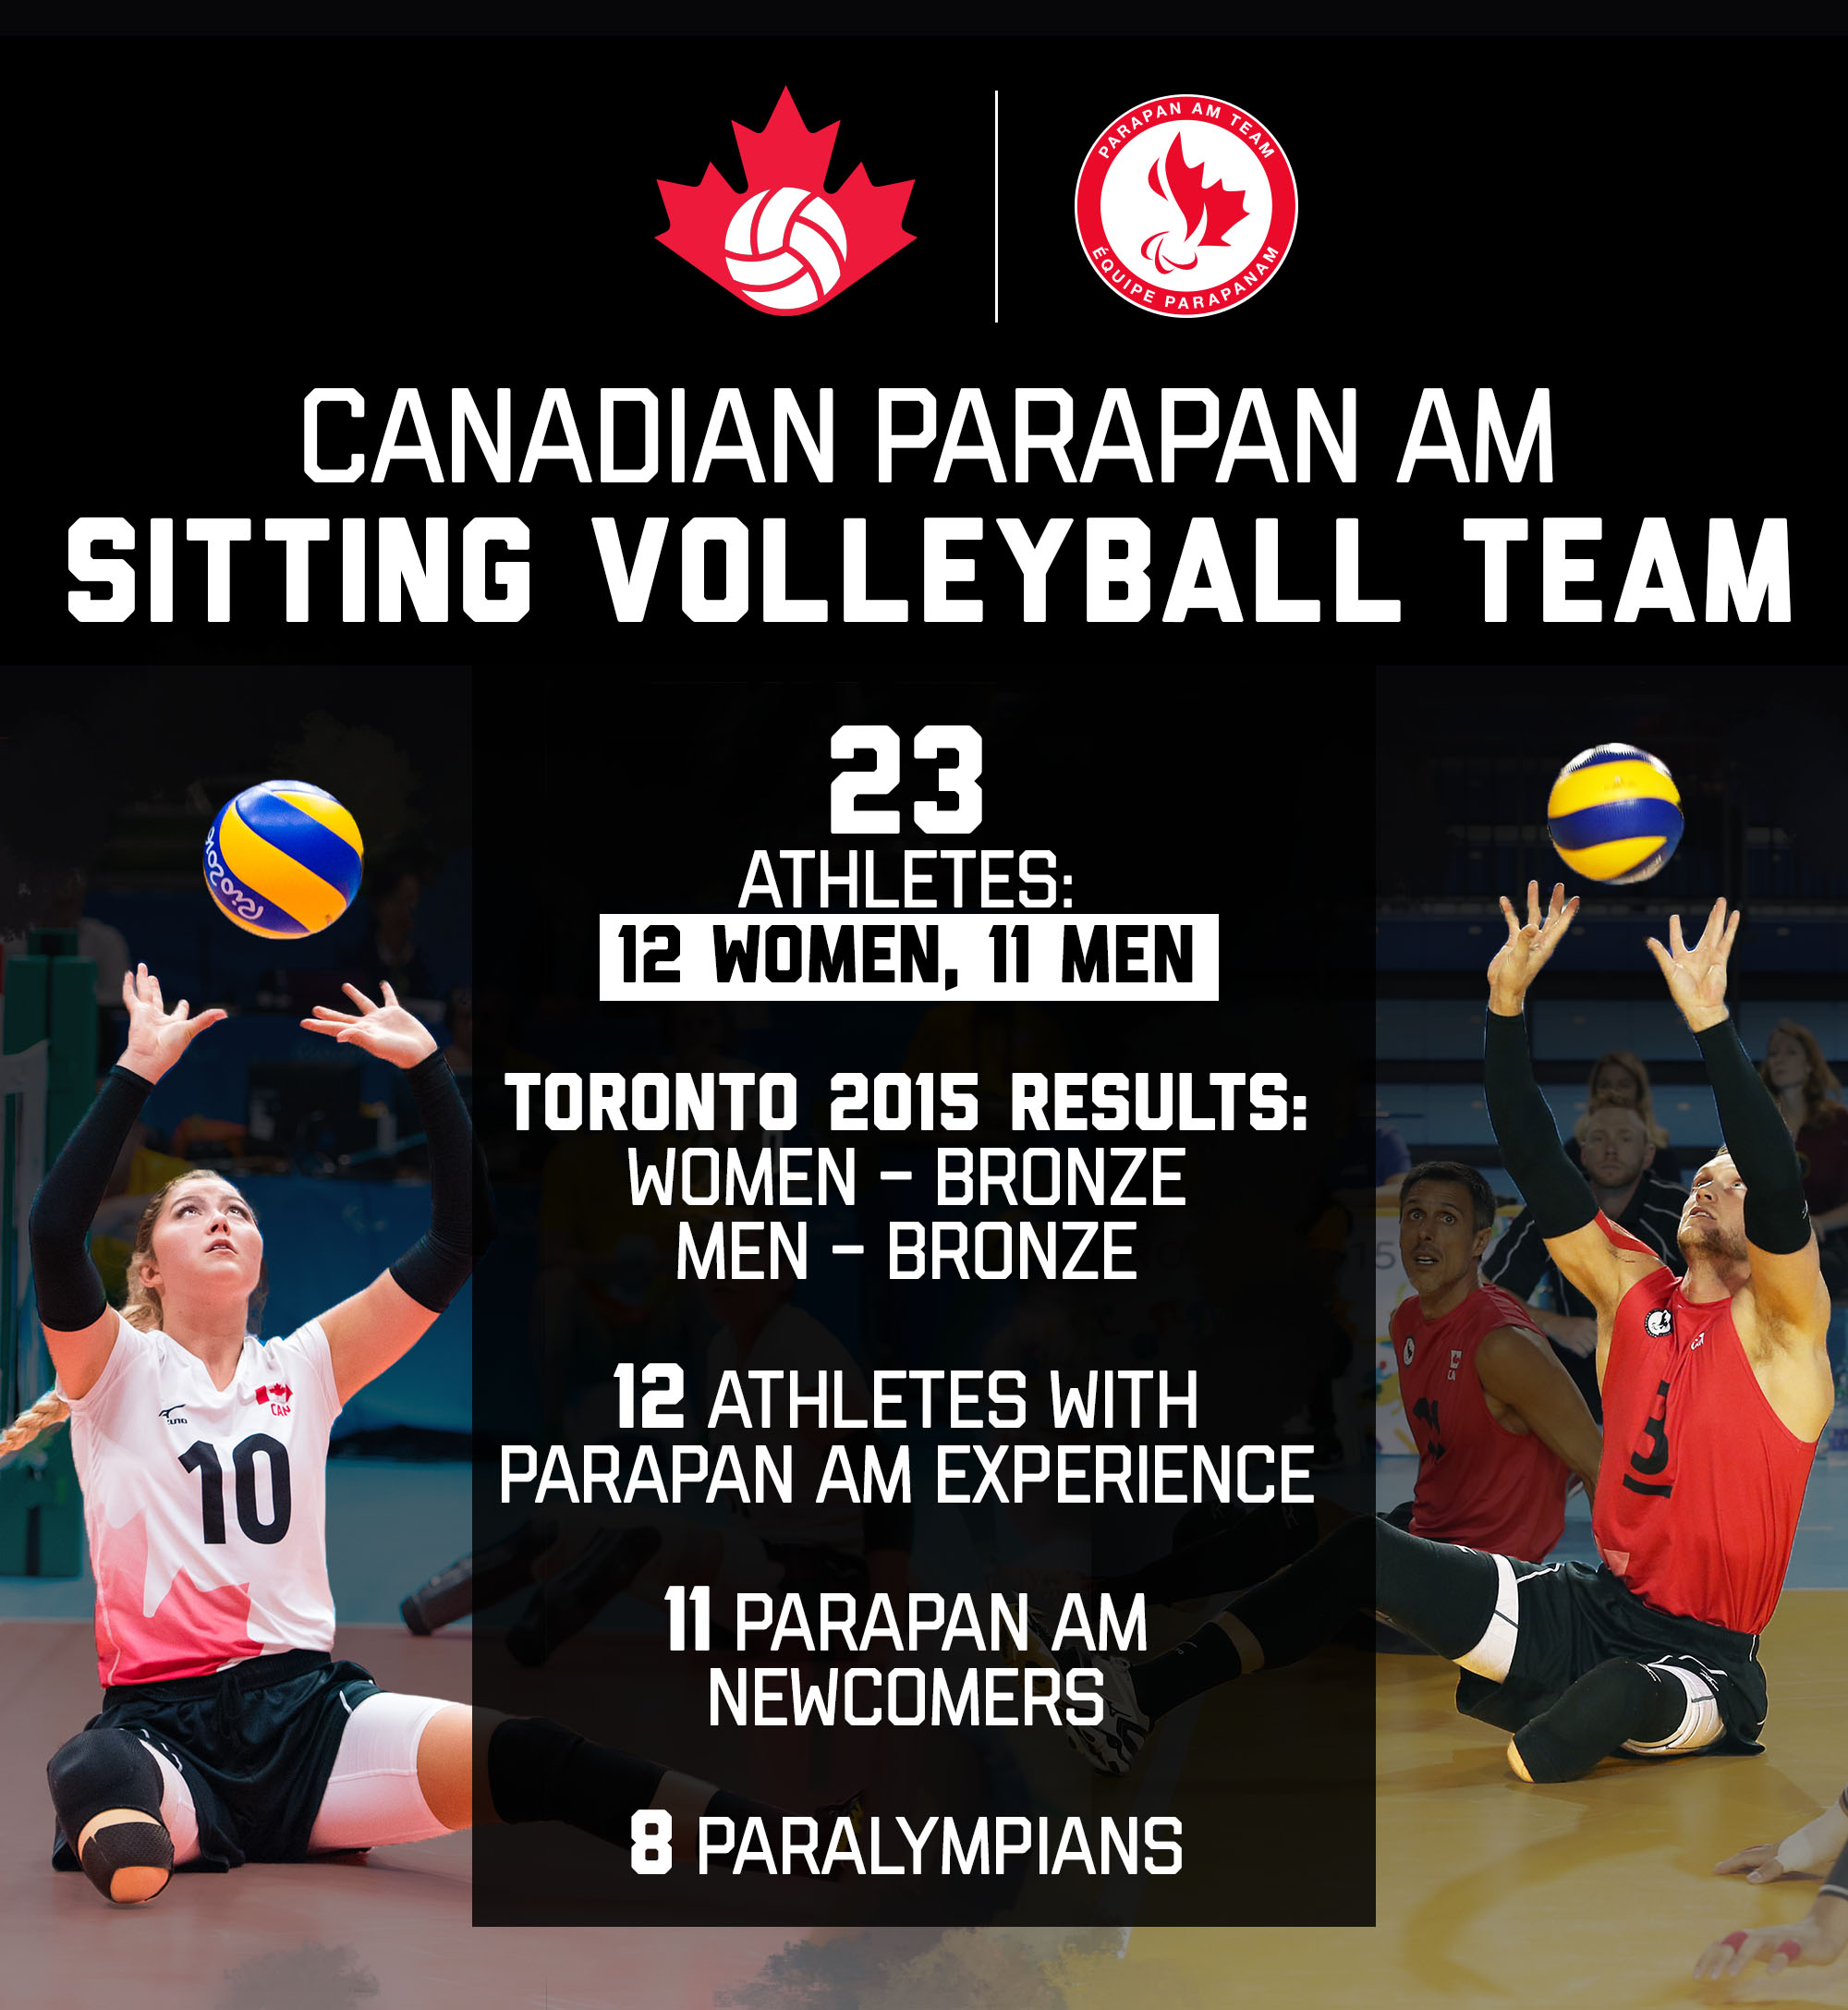 A graphic showing the make-up of the Canadian Parapan Am Sitting Volleyball Team